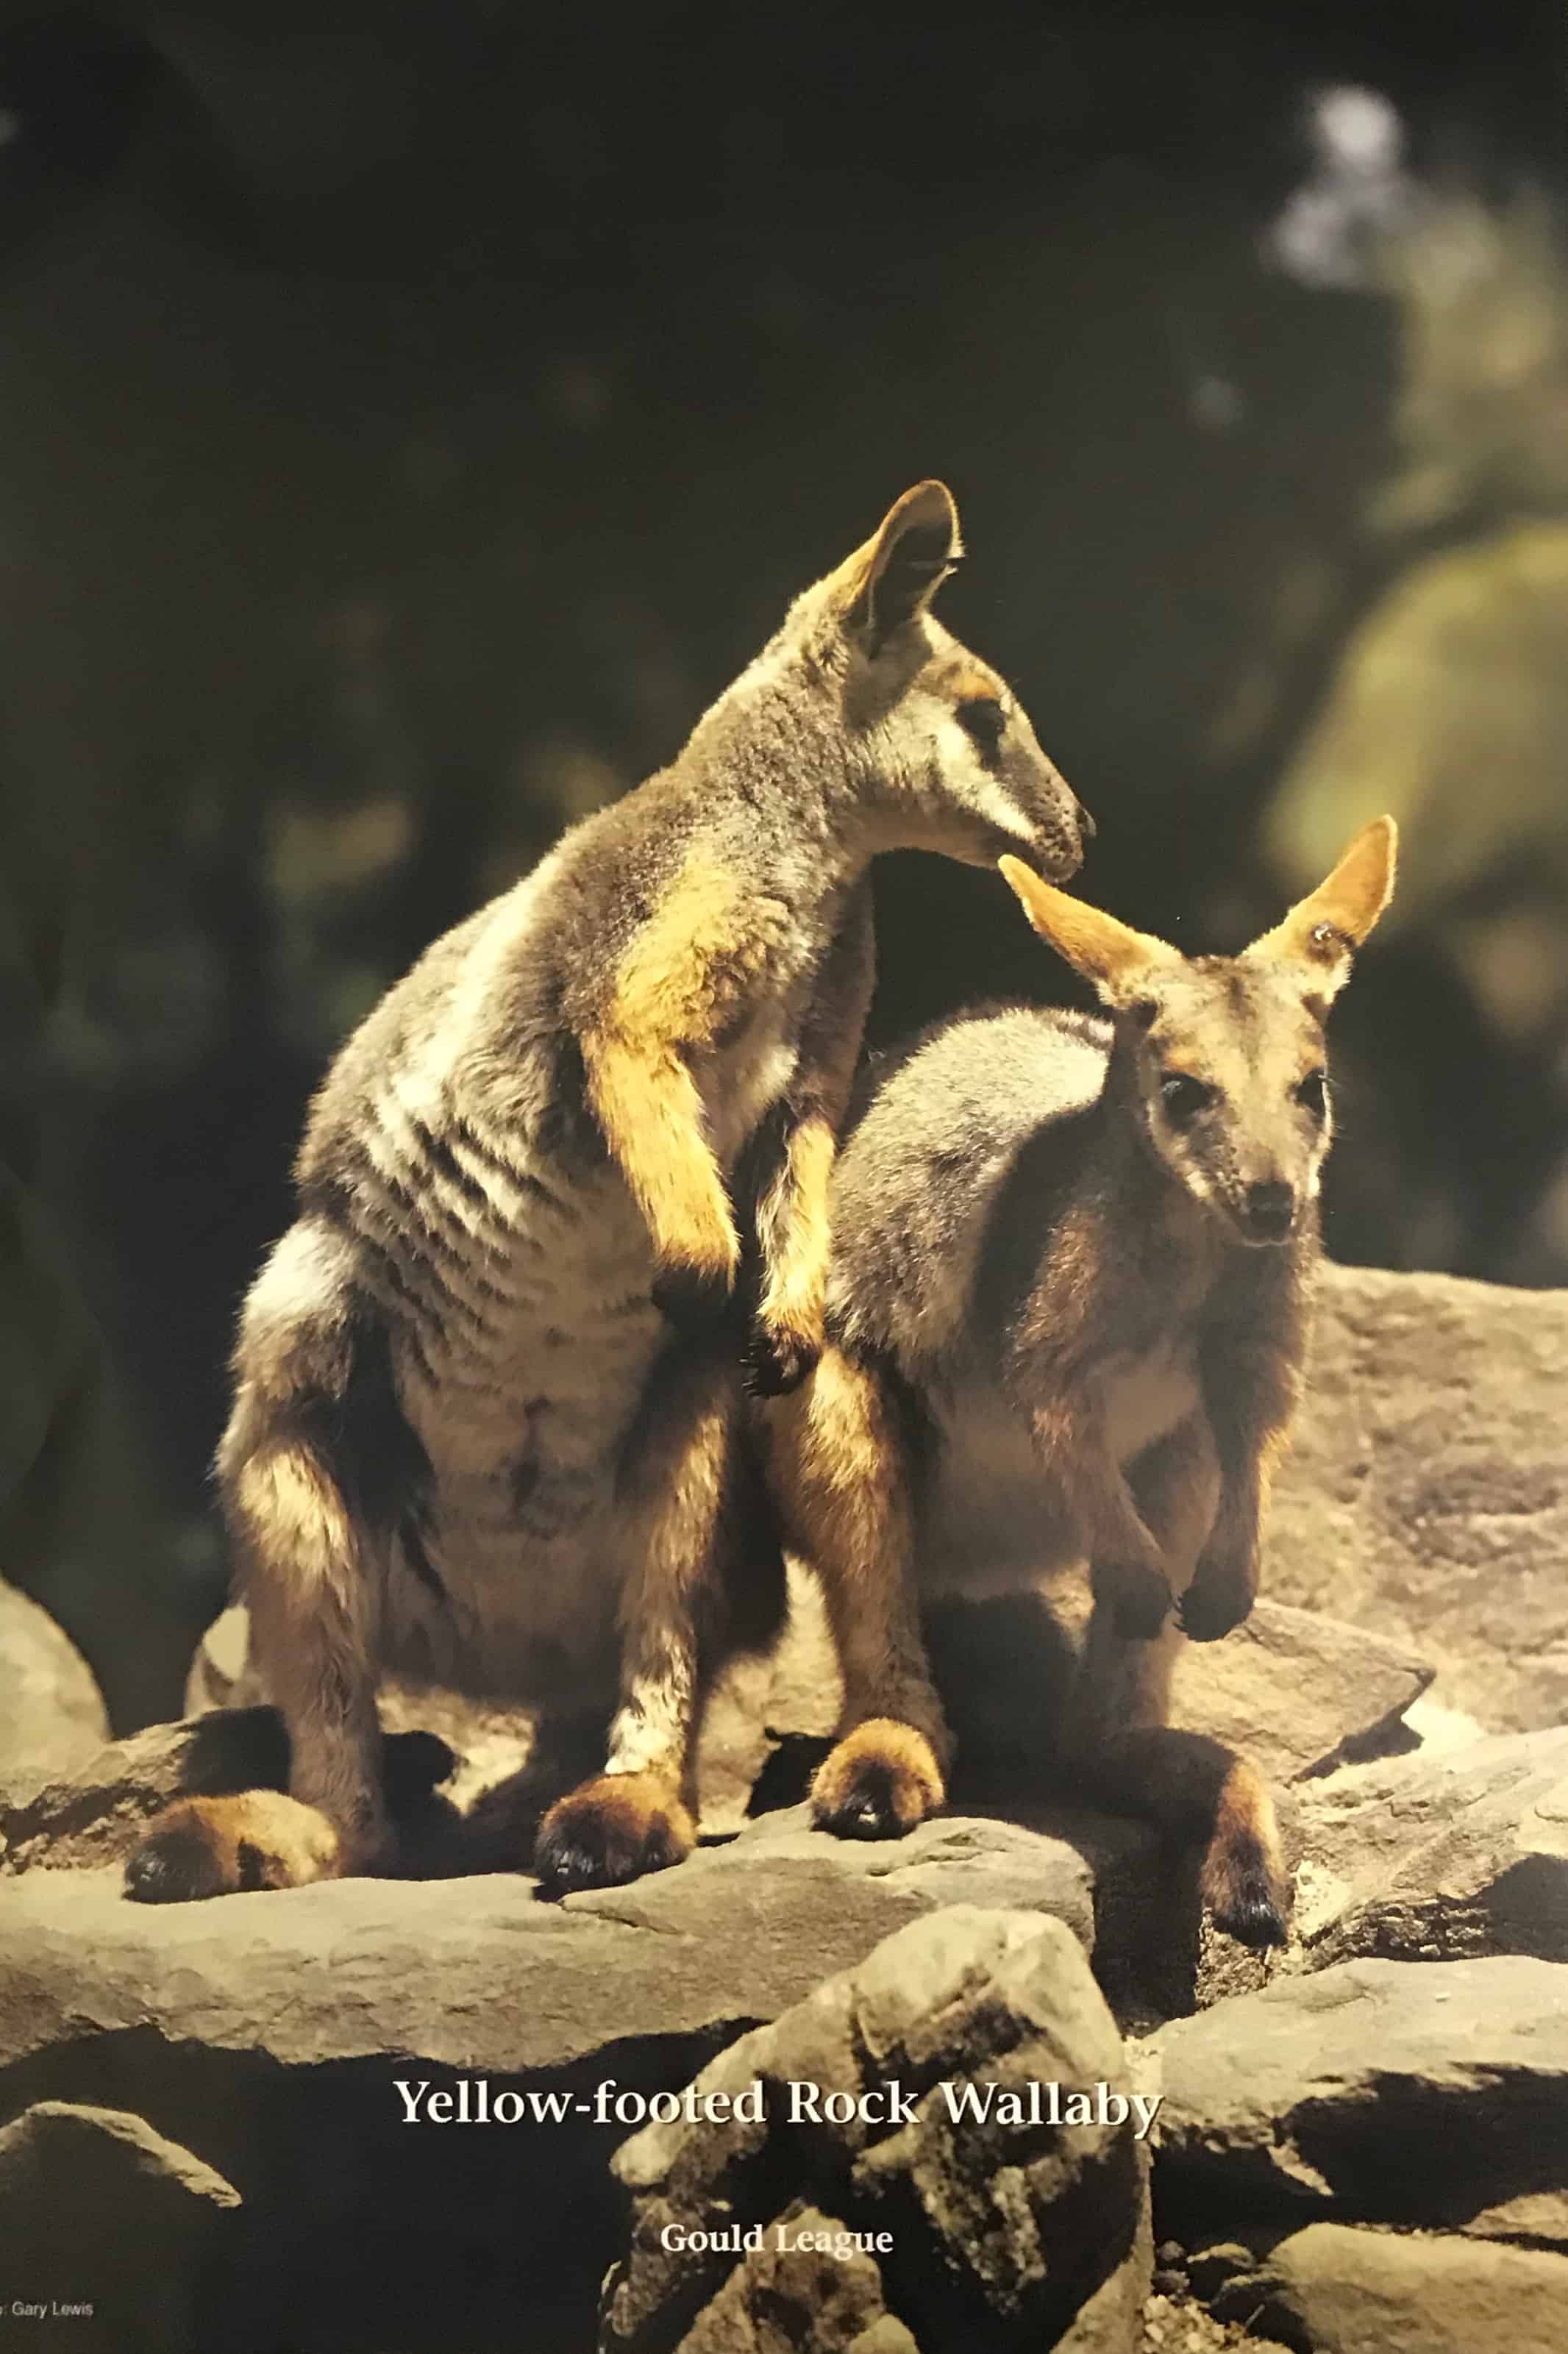 Yellow Footed Rock Wallaby (Endangered Species) Poster – Gould League